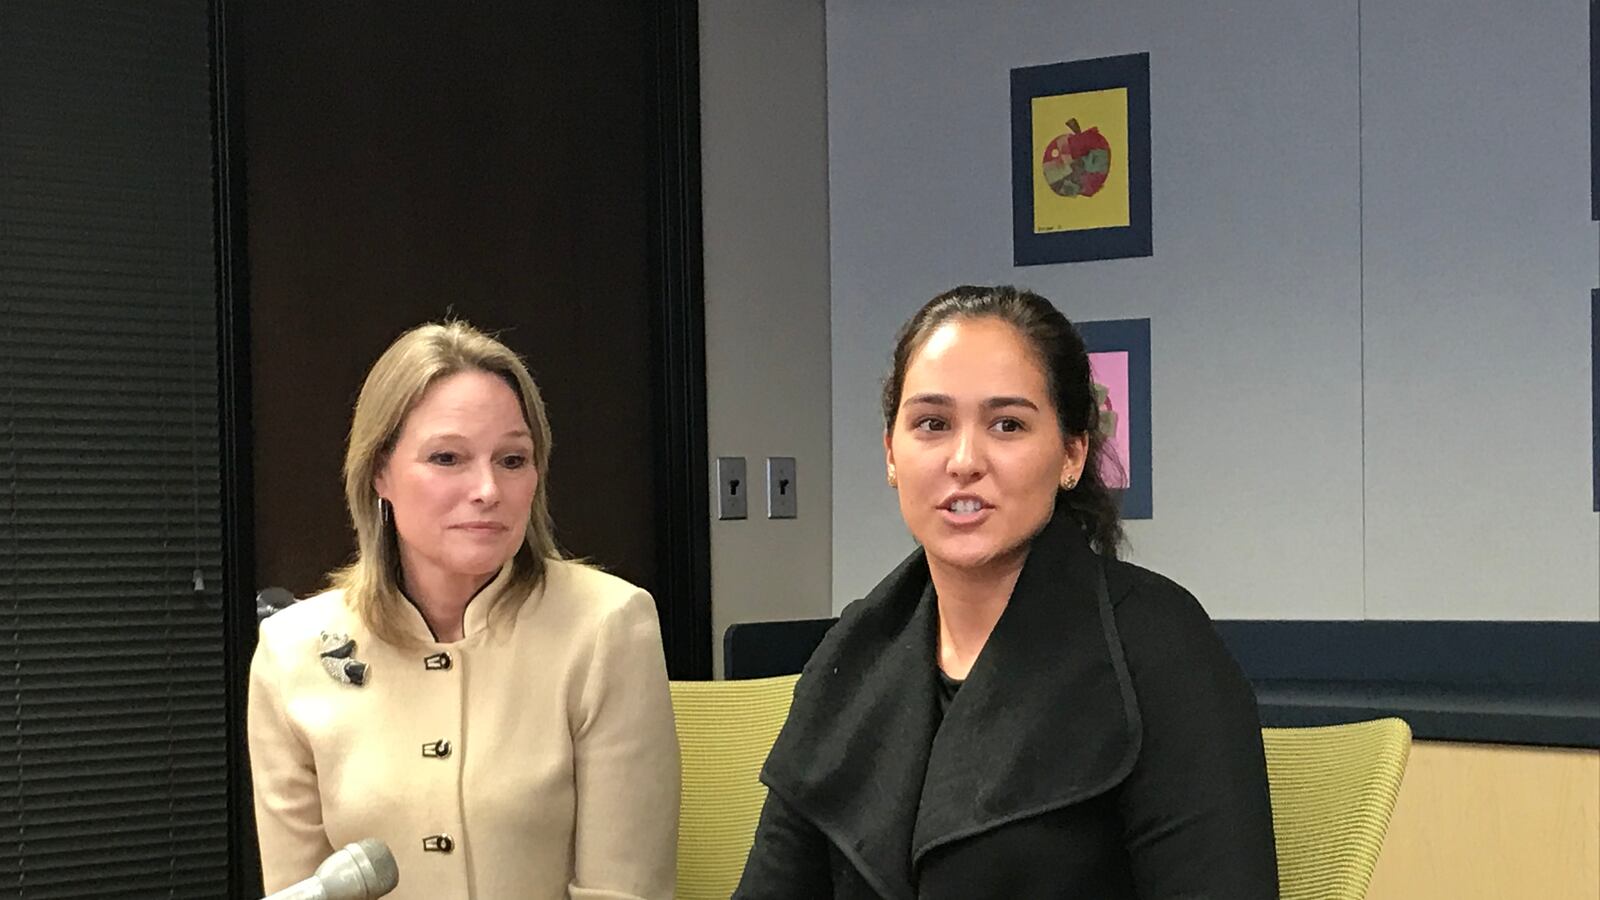 Karen Pastor, left, a veteran Detroit teacher, sits with Samantha Ciaffone during a news conference Wednesday. Pastor is mentoring Ciaffone through a new program in the Detroit Public Schools Community District.